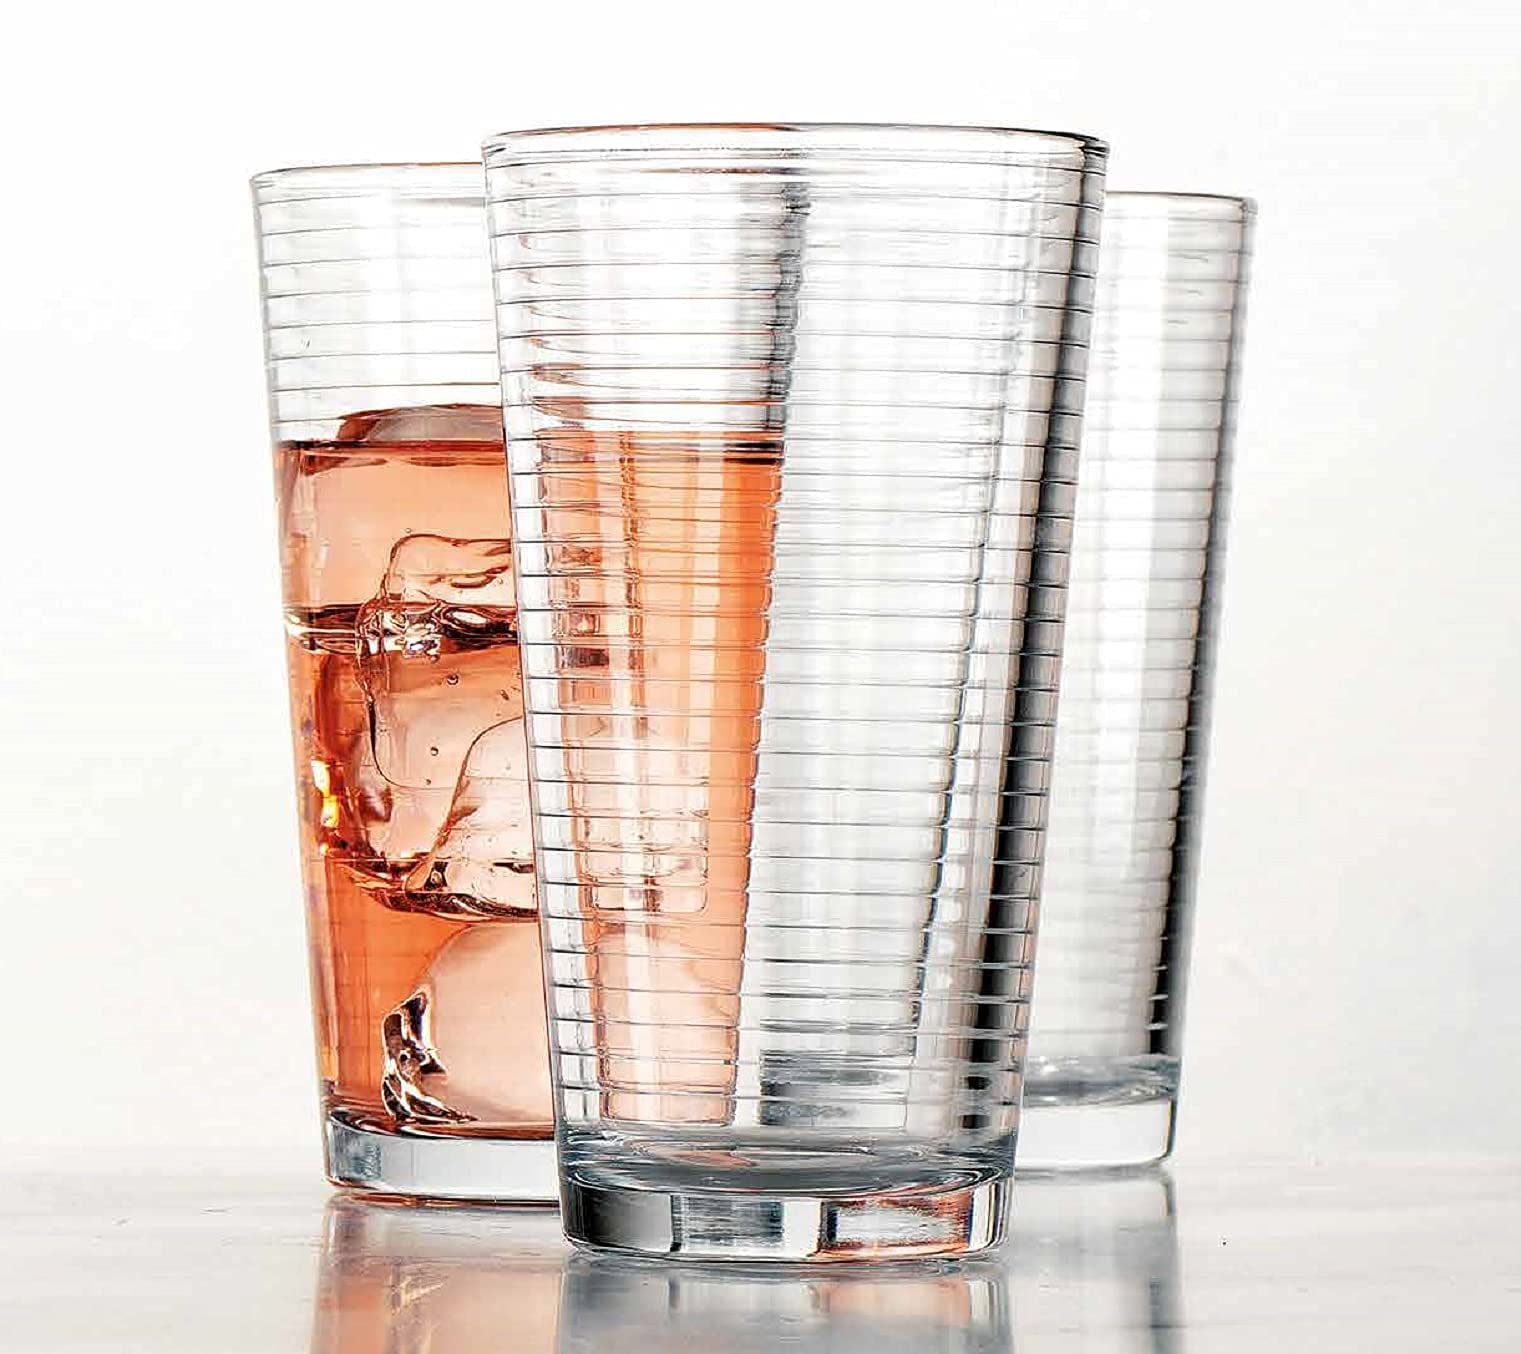 Drinking Glasses Set of Highball Glass Cups By Glavers, Premium Quality Cooler 17 Oz. Ribbed Glassware. Ideal for Water, Juice, Cocktails, and Iced Tea. Dishwasher Safe.…  - Acceptable